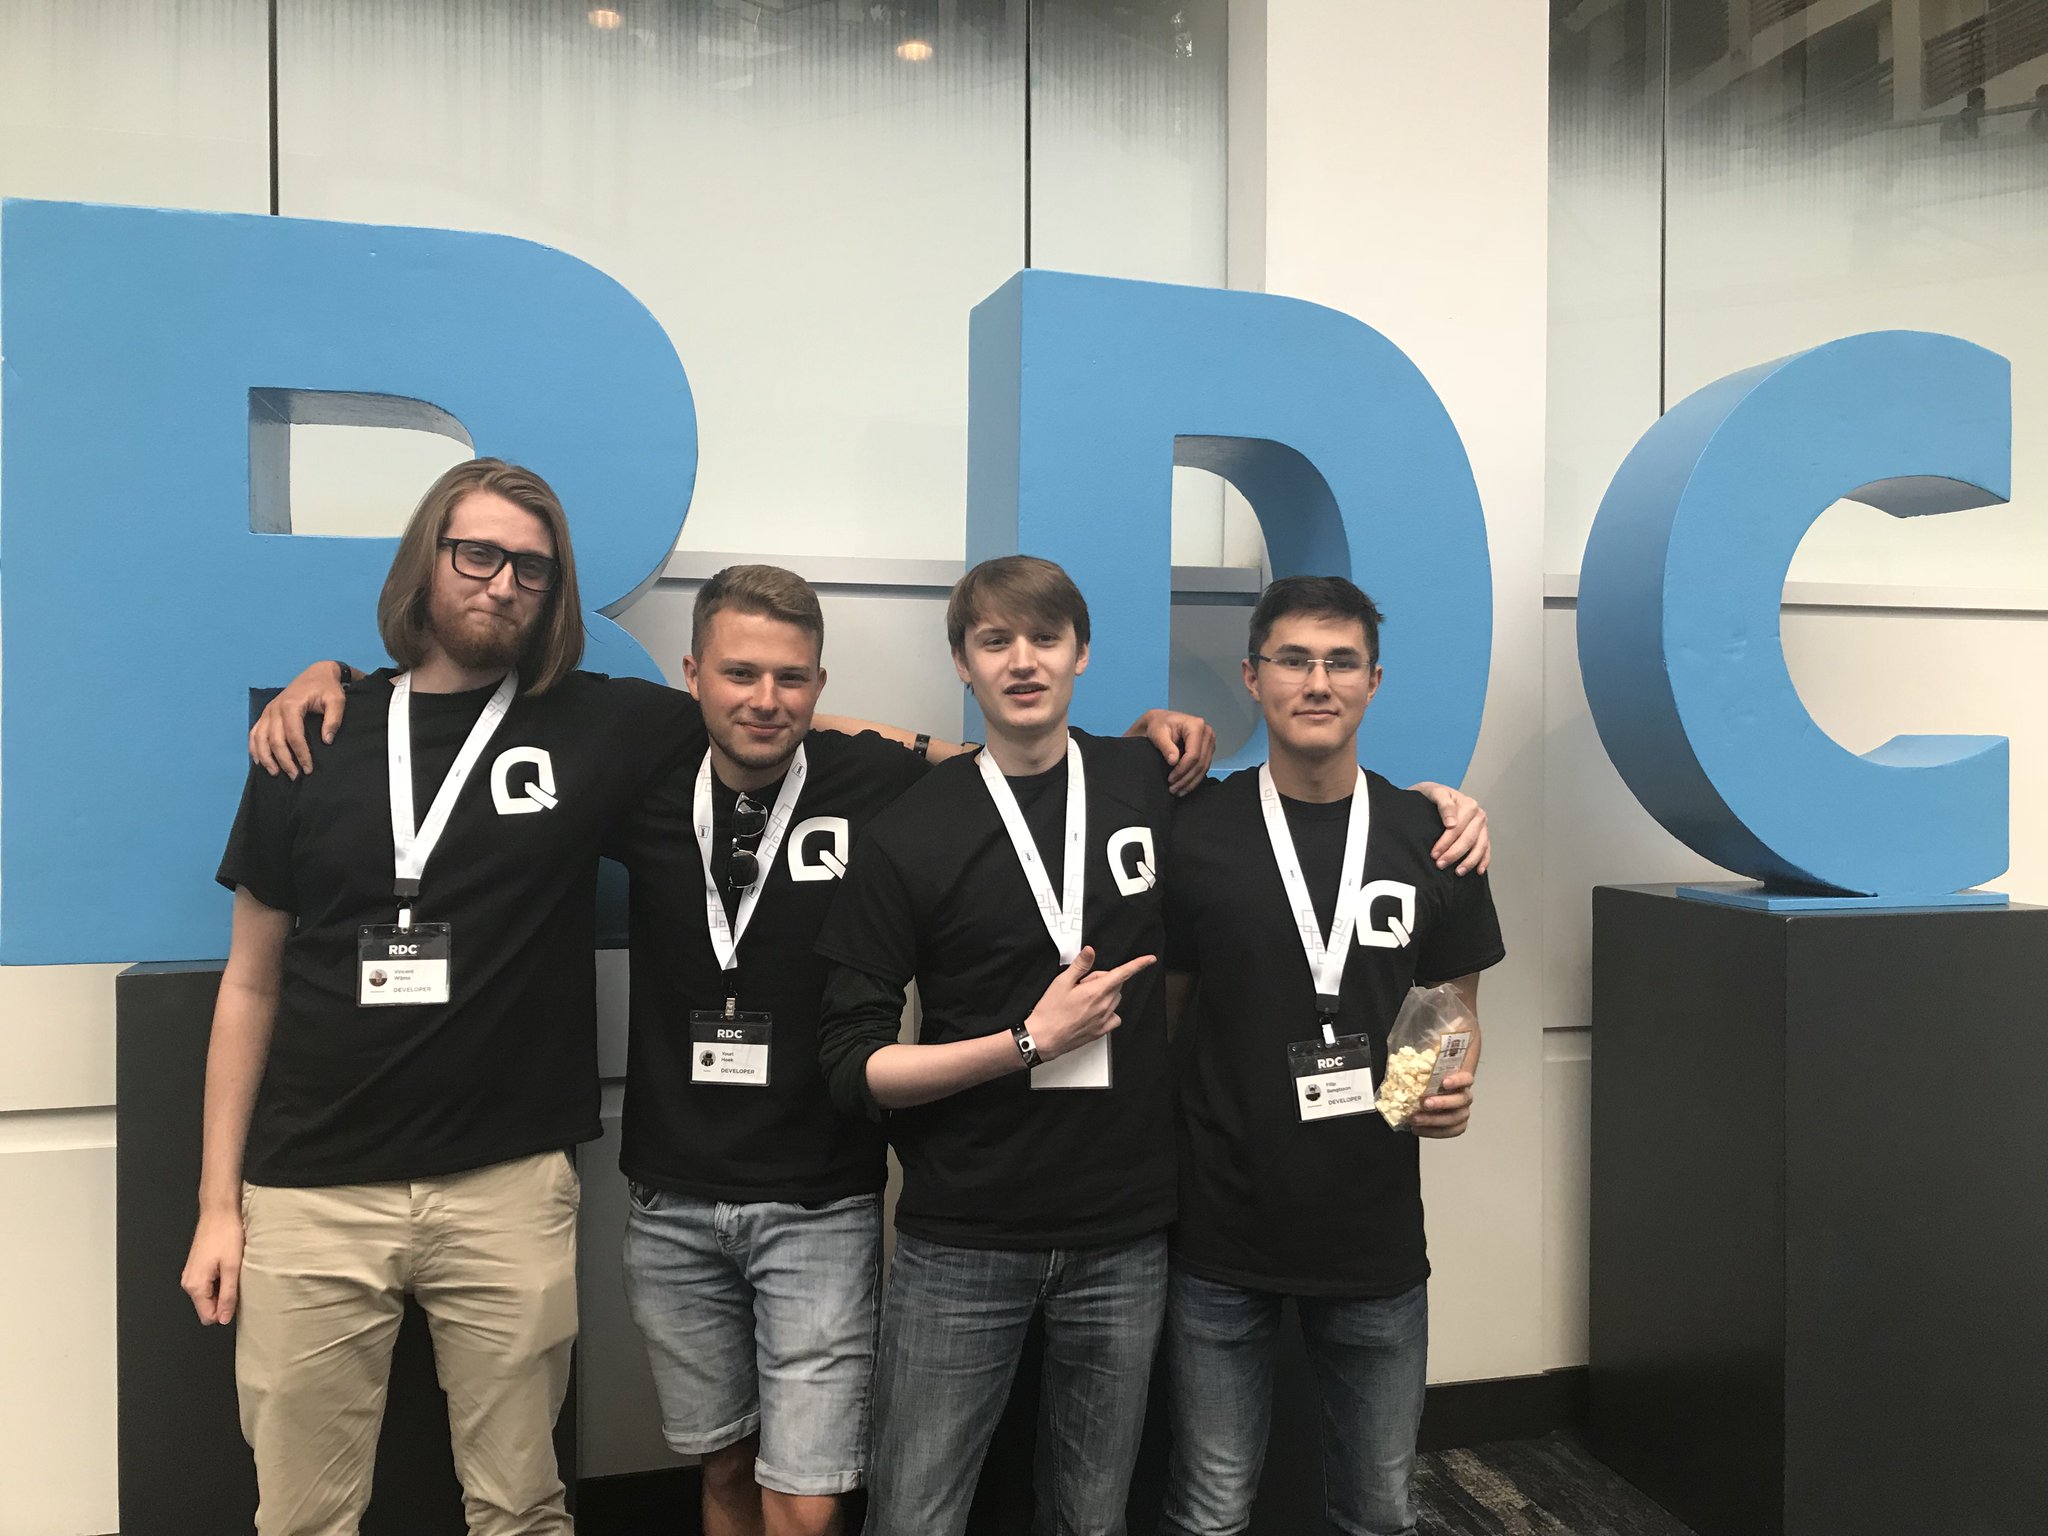 Roblox Developer Relations On Twitter We Found The Q Clash Team At Rdc2018 And Asked Them What They Ve Enjoyed So Far They All Said The Same Thing The Food Be Sure To - event how to get the rdc shirt roblox developers